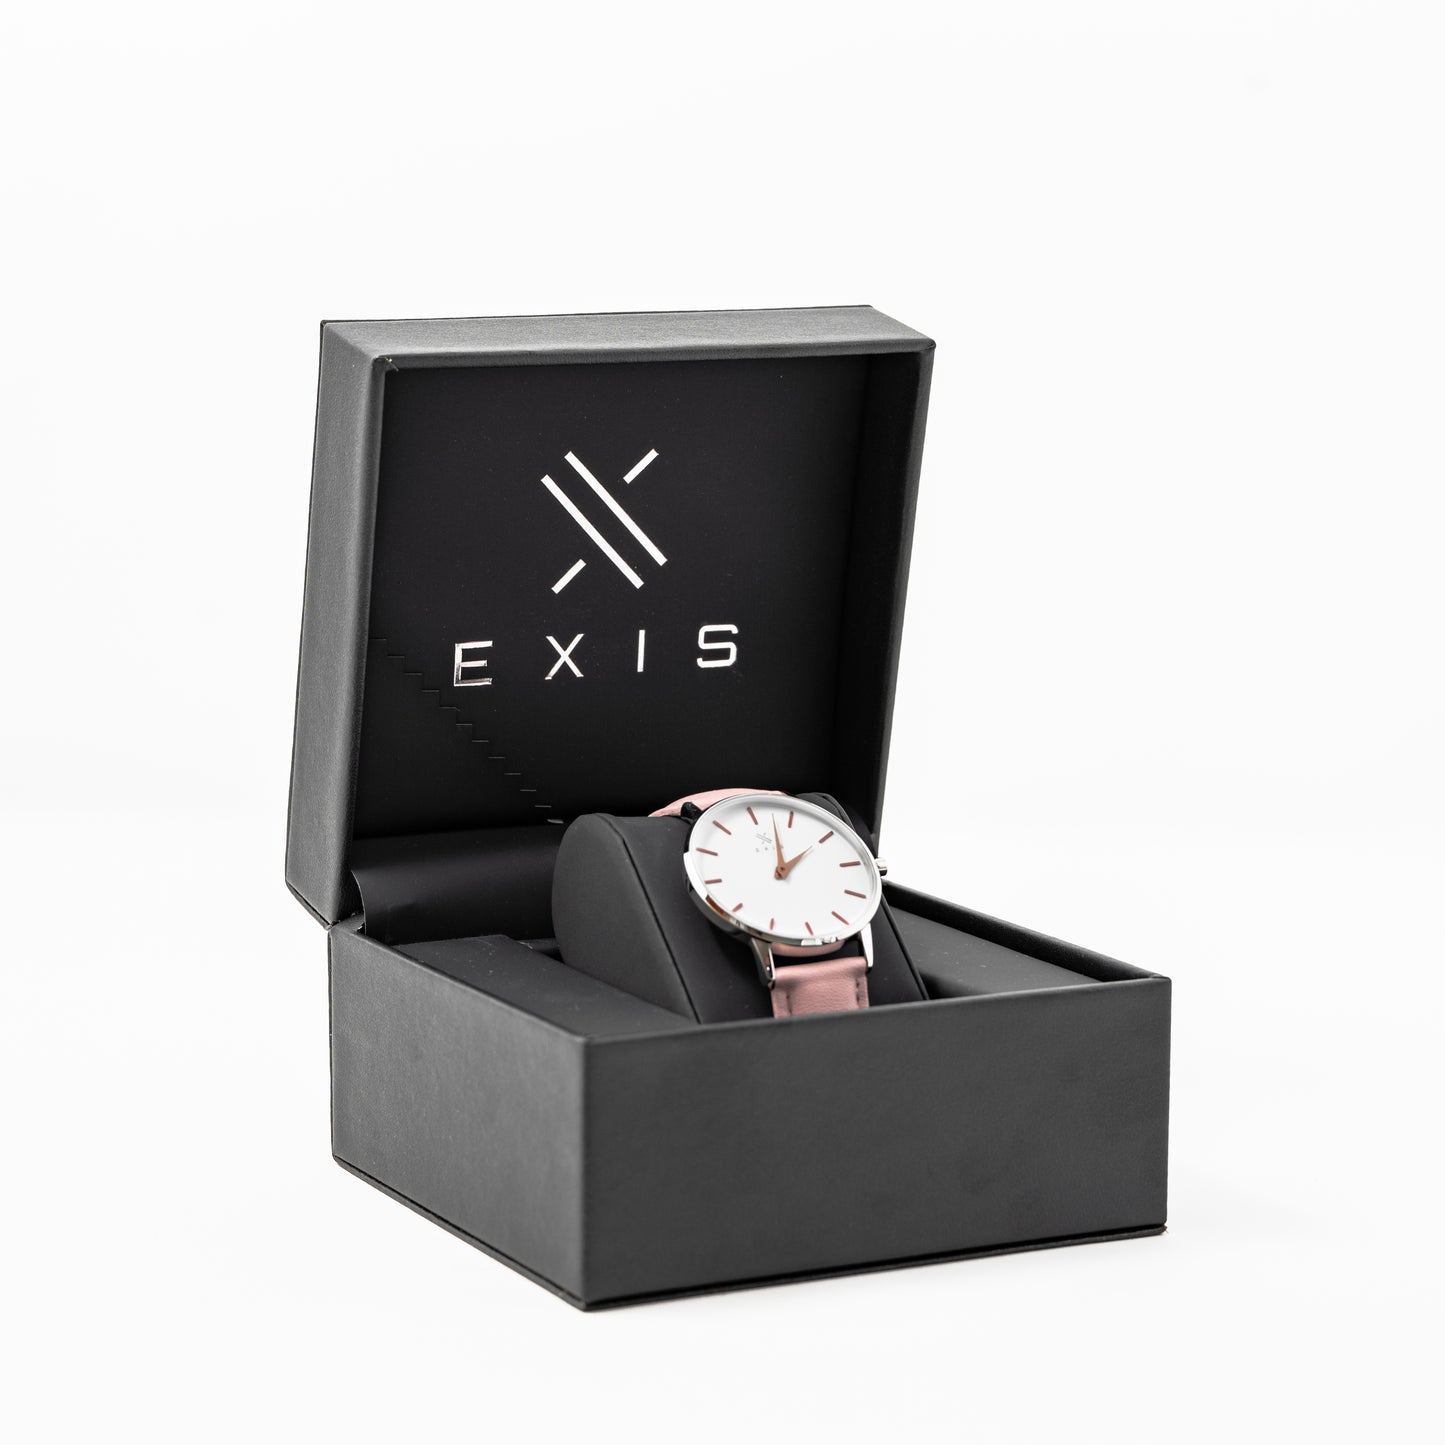 ADVANCED PINK - Exis watches